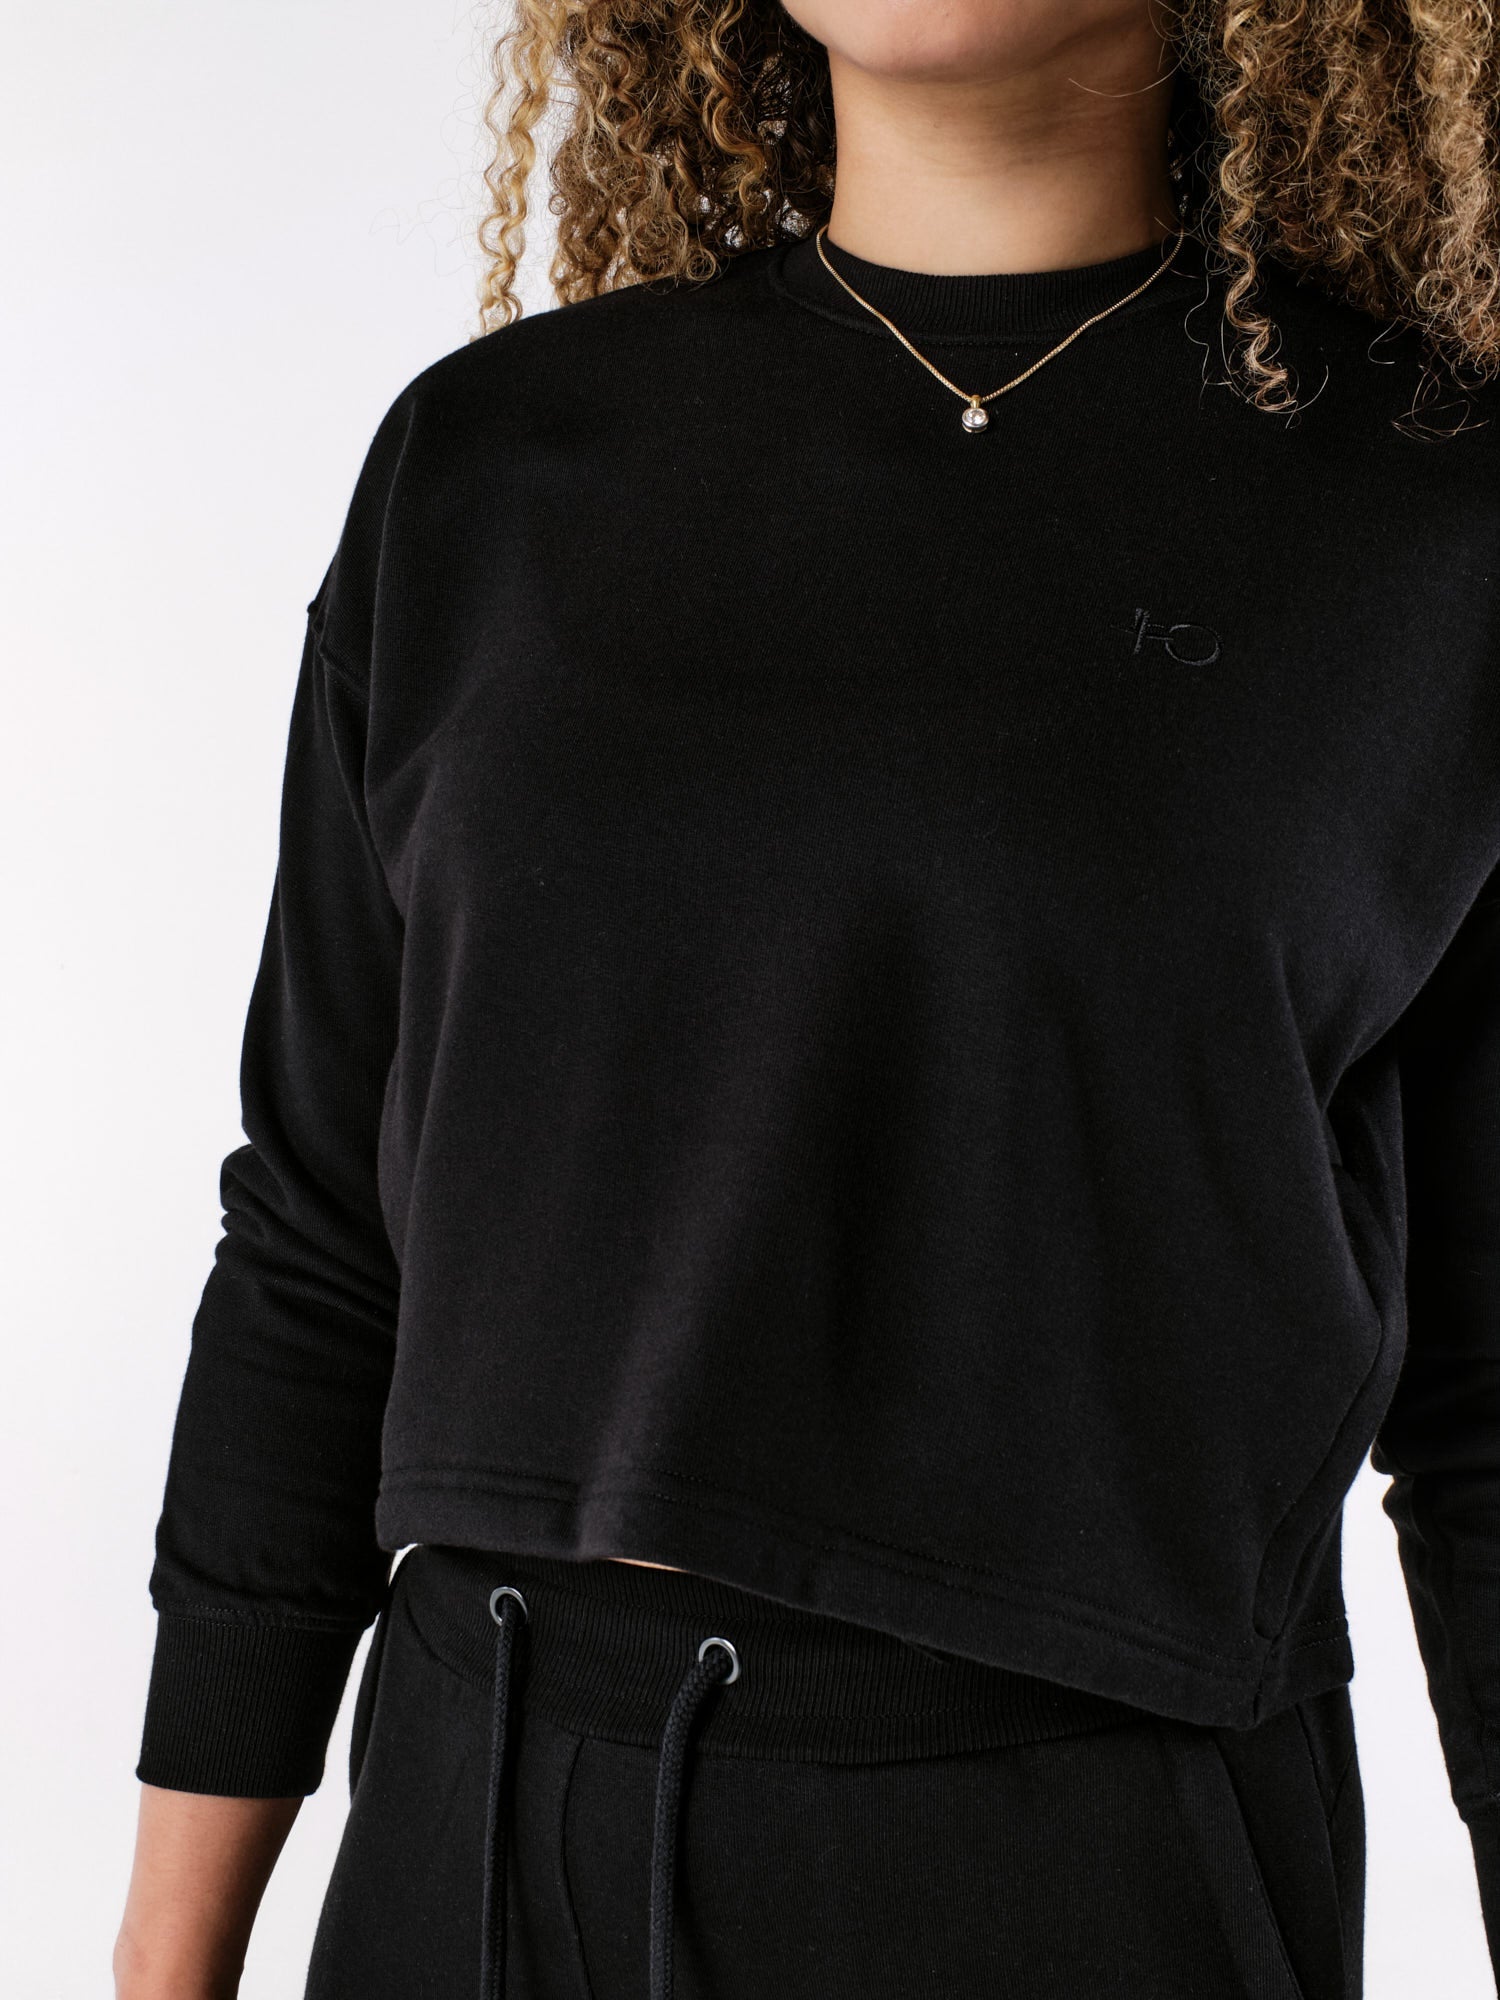 Bamboo - All-Day Cropped Sweatshirt